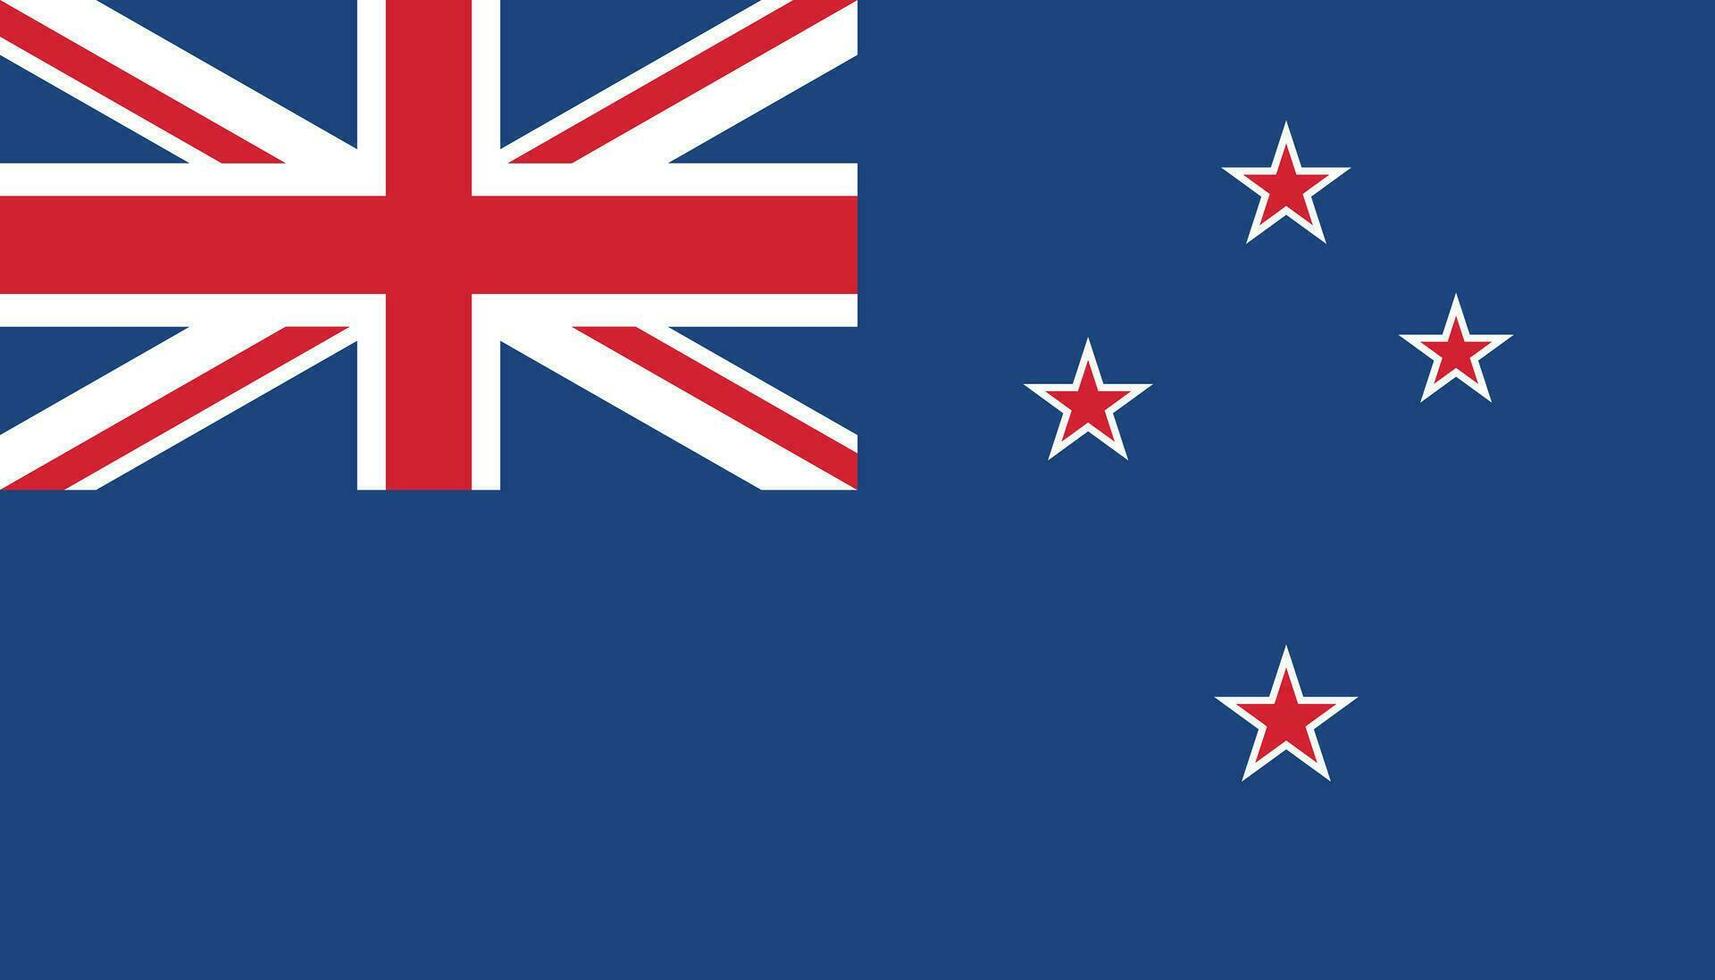 New Zealand flag icon in flat style. National sign vector illustration. Politic business concept.